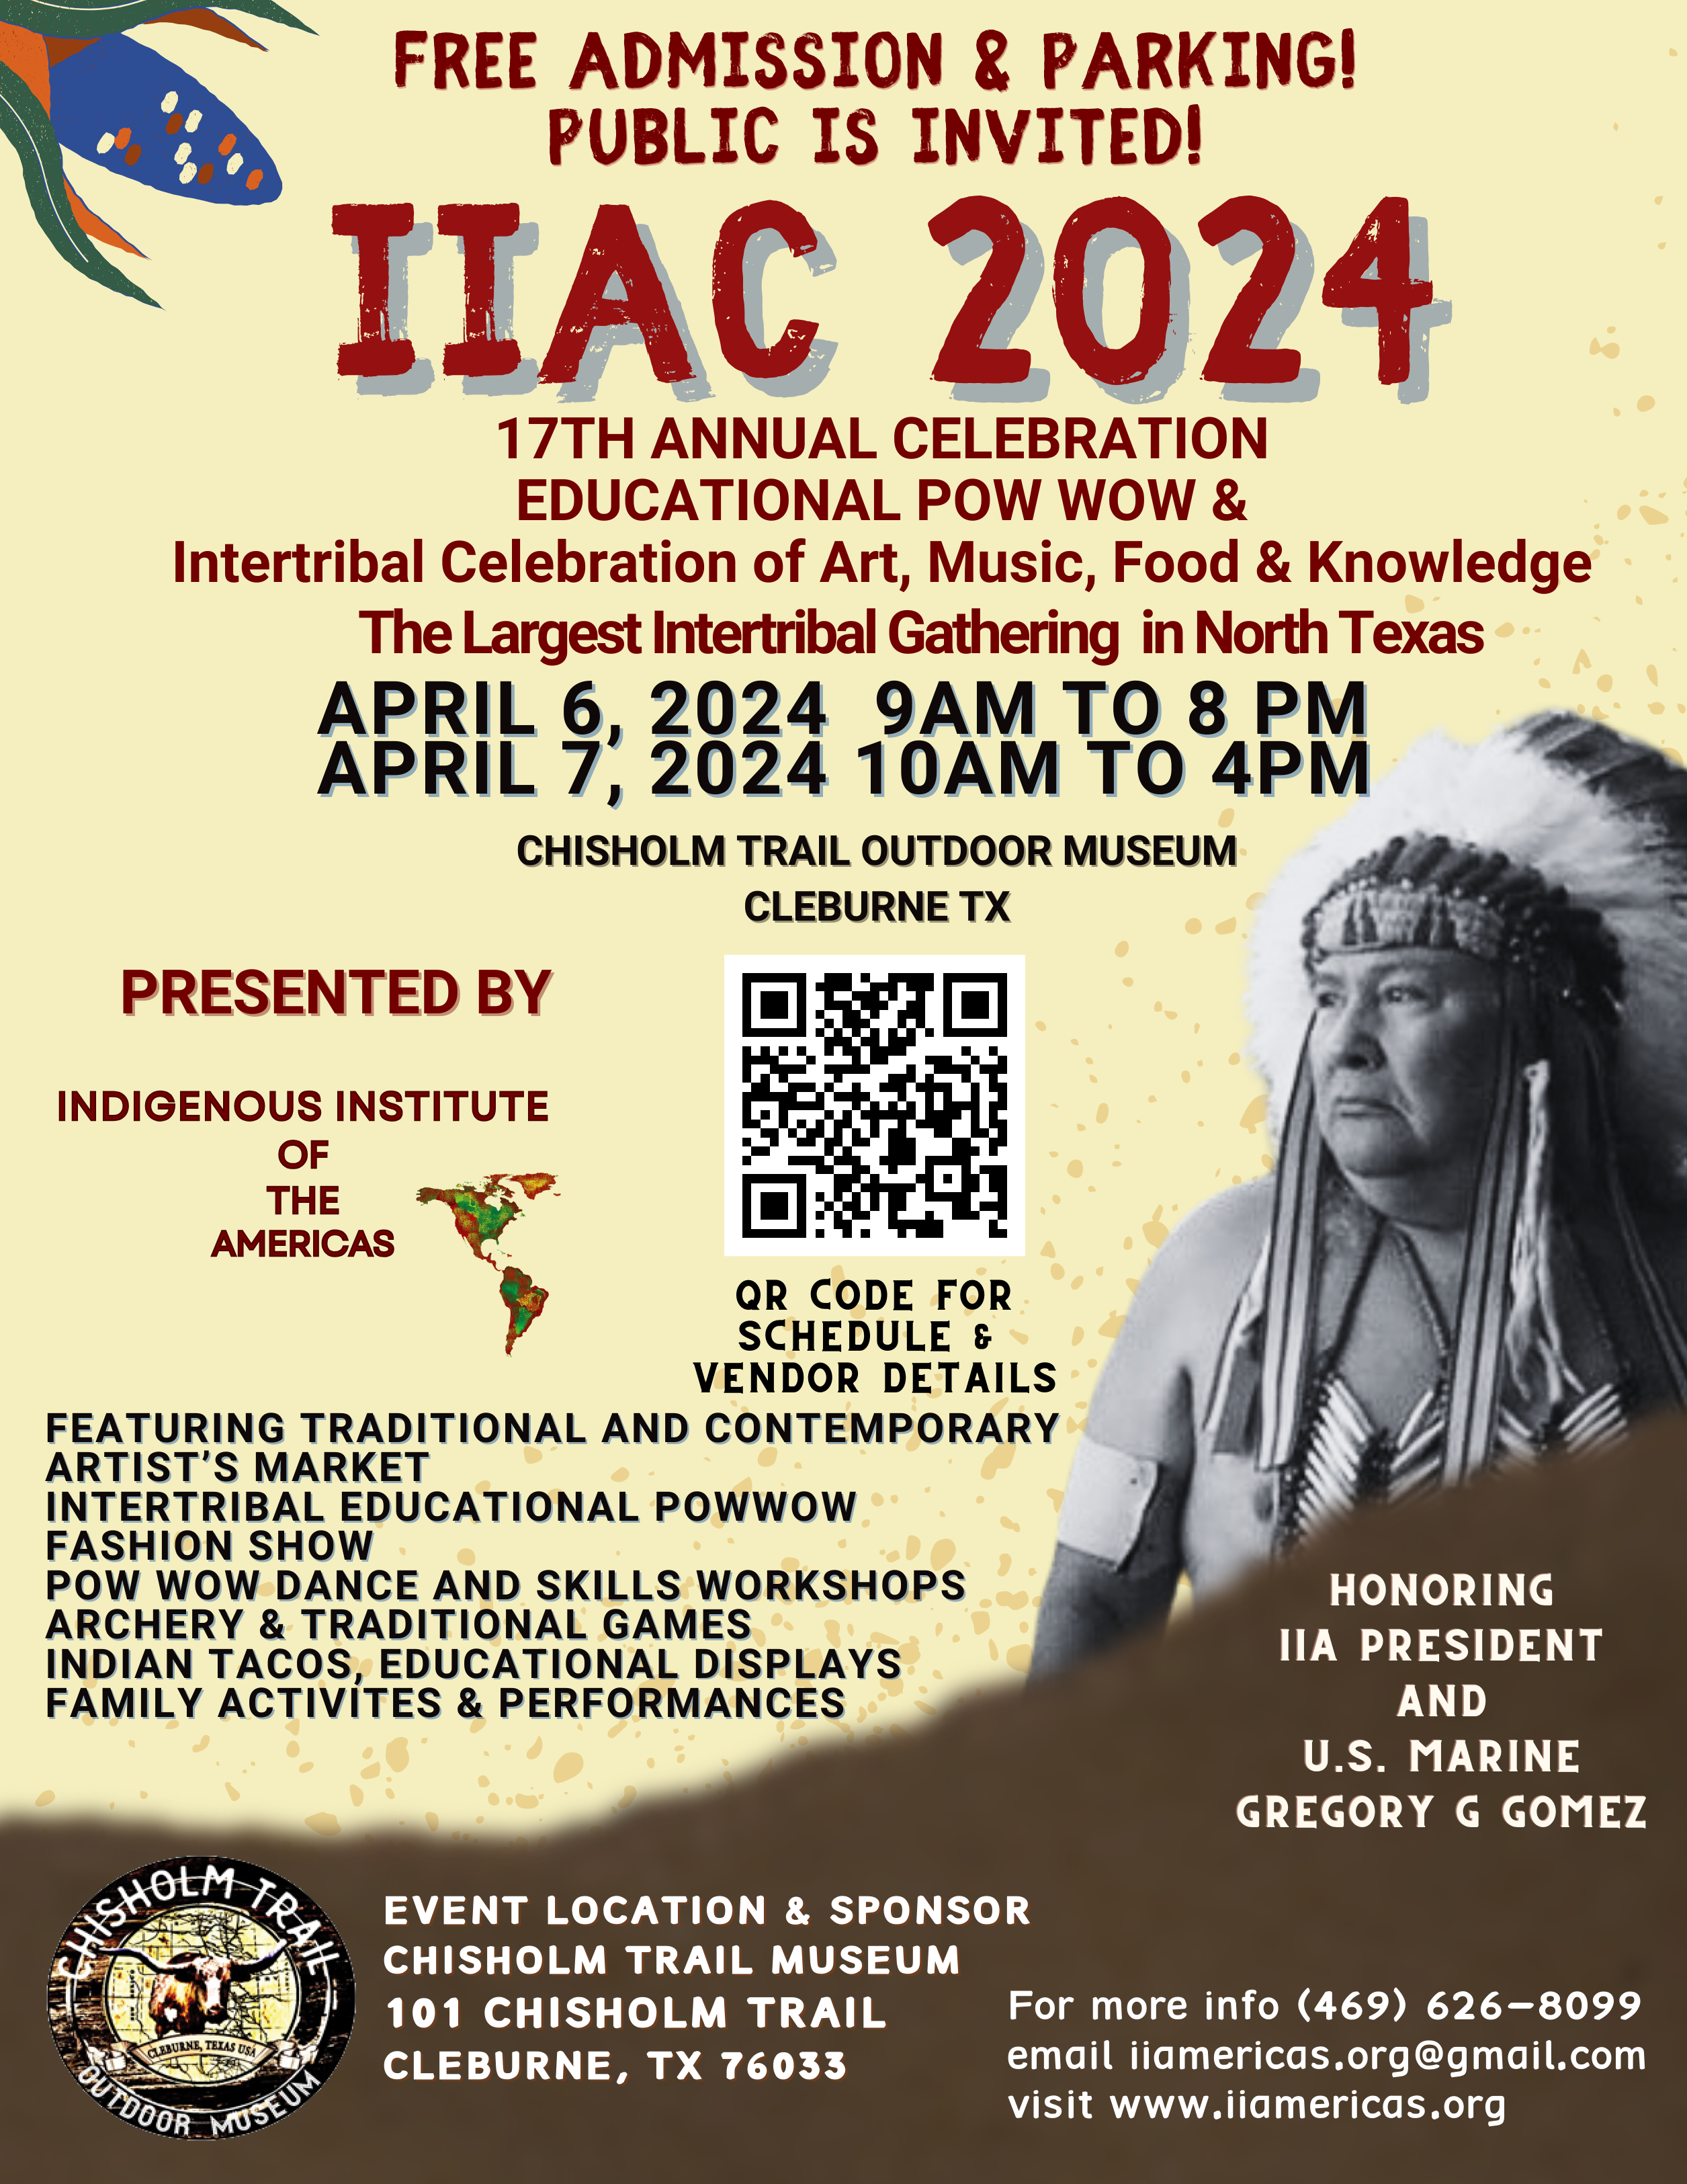 Event flyer for IIAC 2024